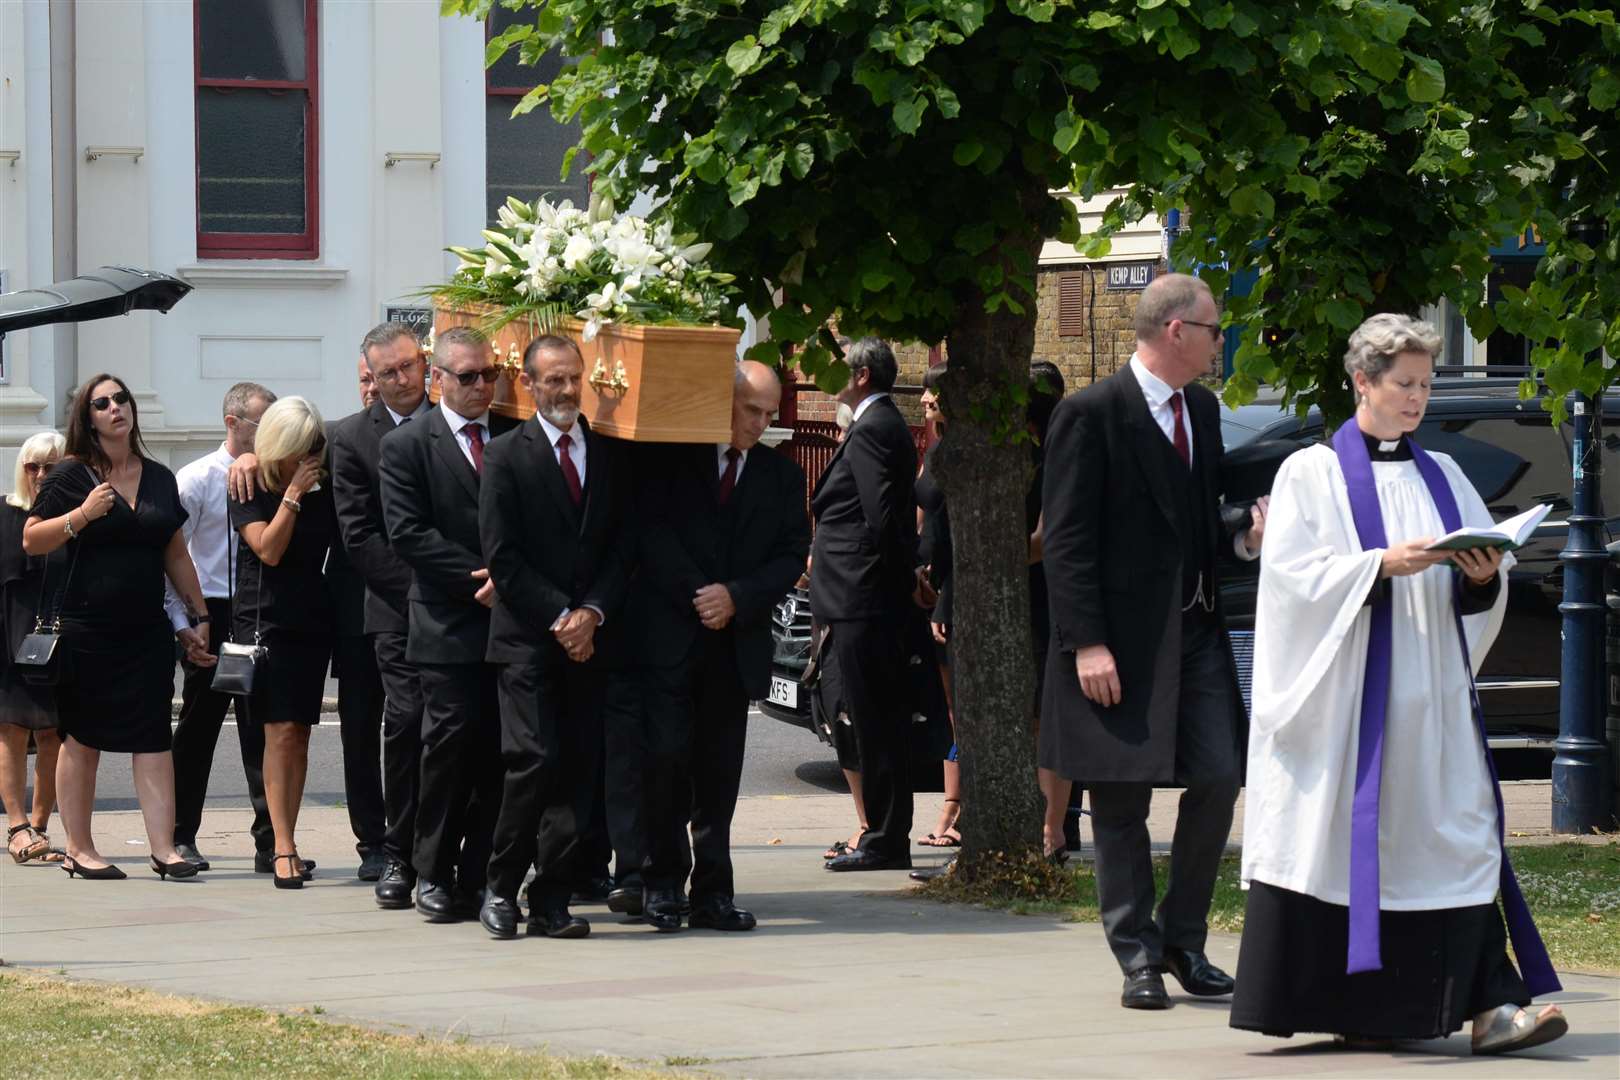 Hundreds gathered for the funeral of Kim Sampson